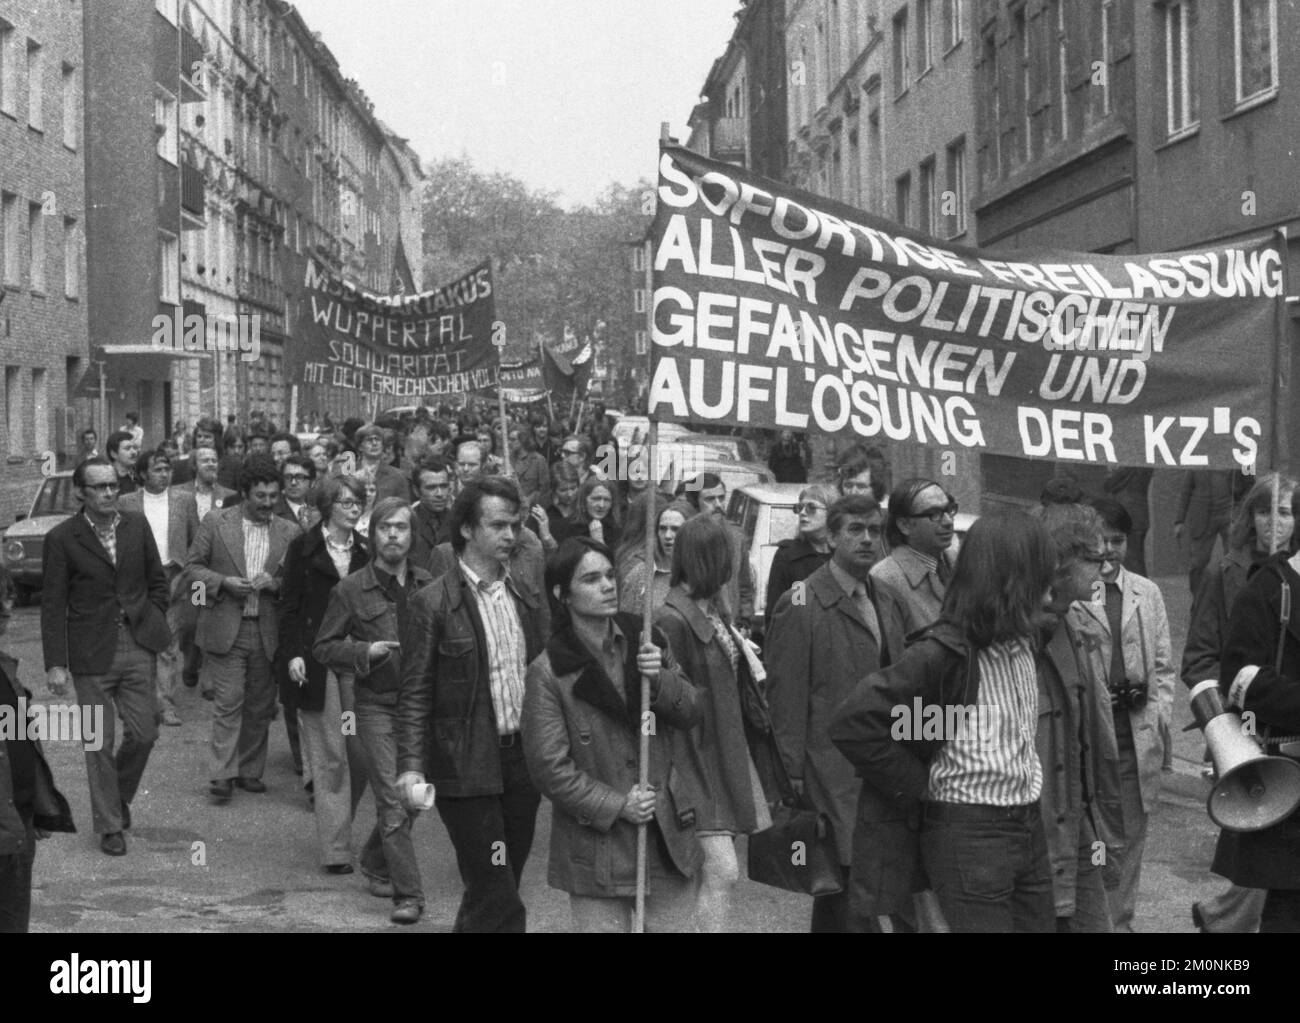 An international youth seminar followed by a demonstration of Germans and Greeks in Düsseldorf on 27 April 1974 manifested solidarity with the struggl Stock Photo